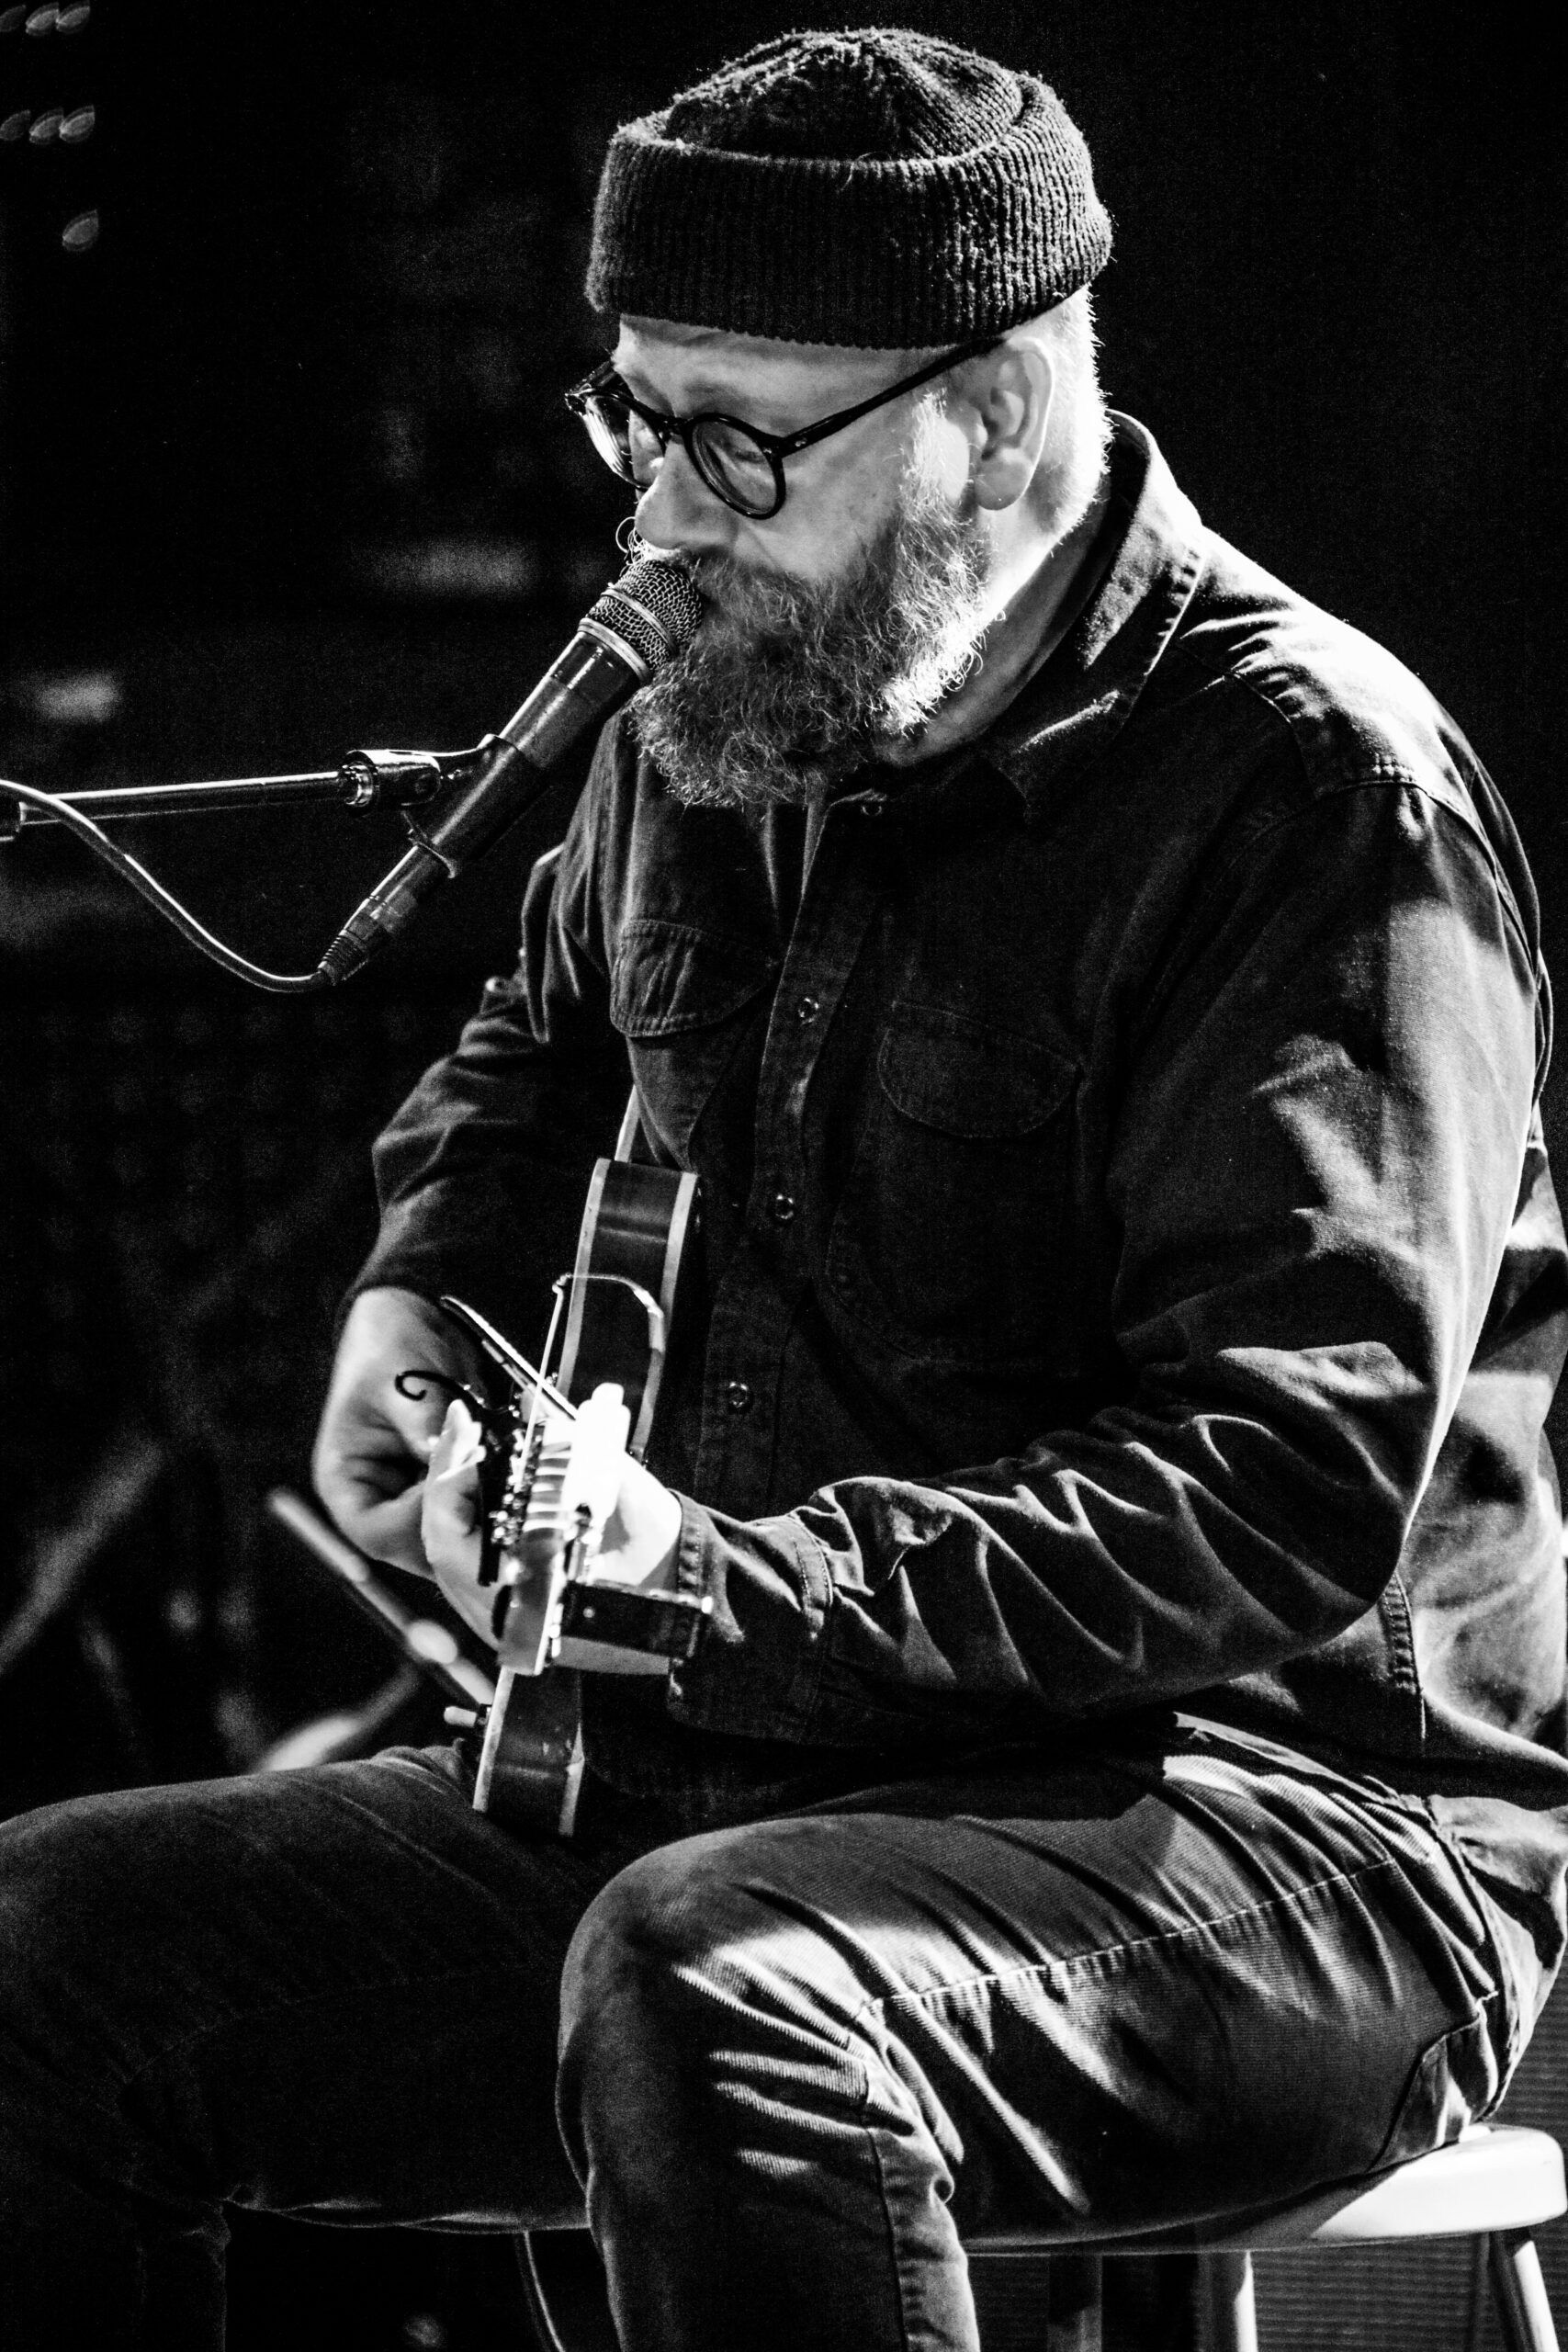 Mike Doughty in black and white